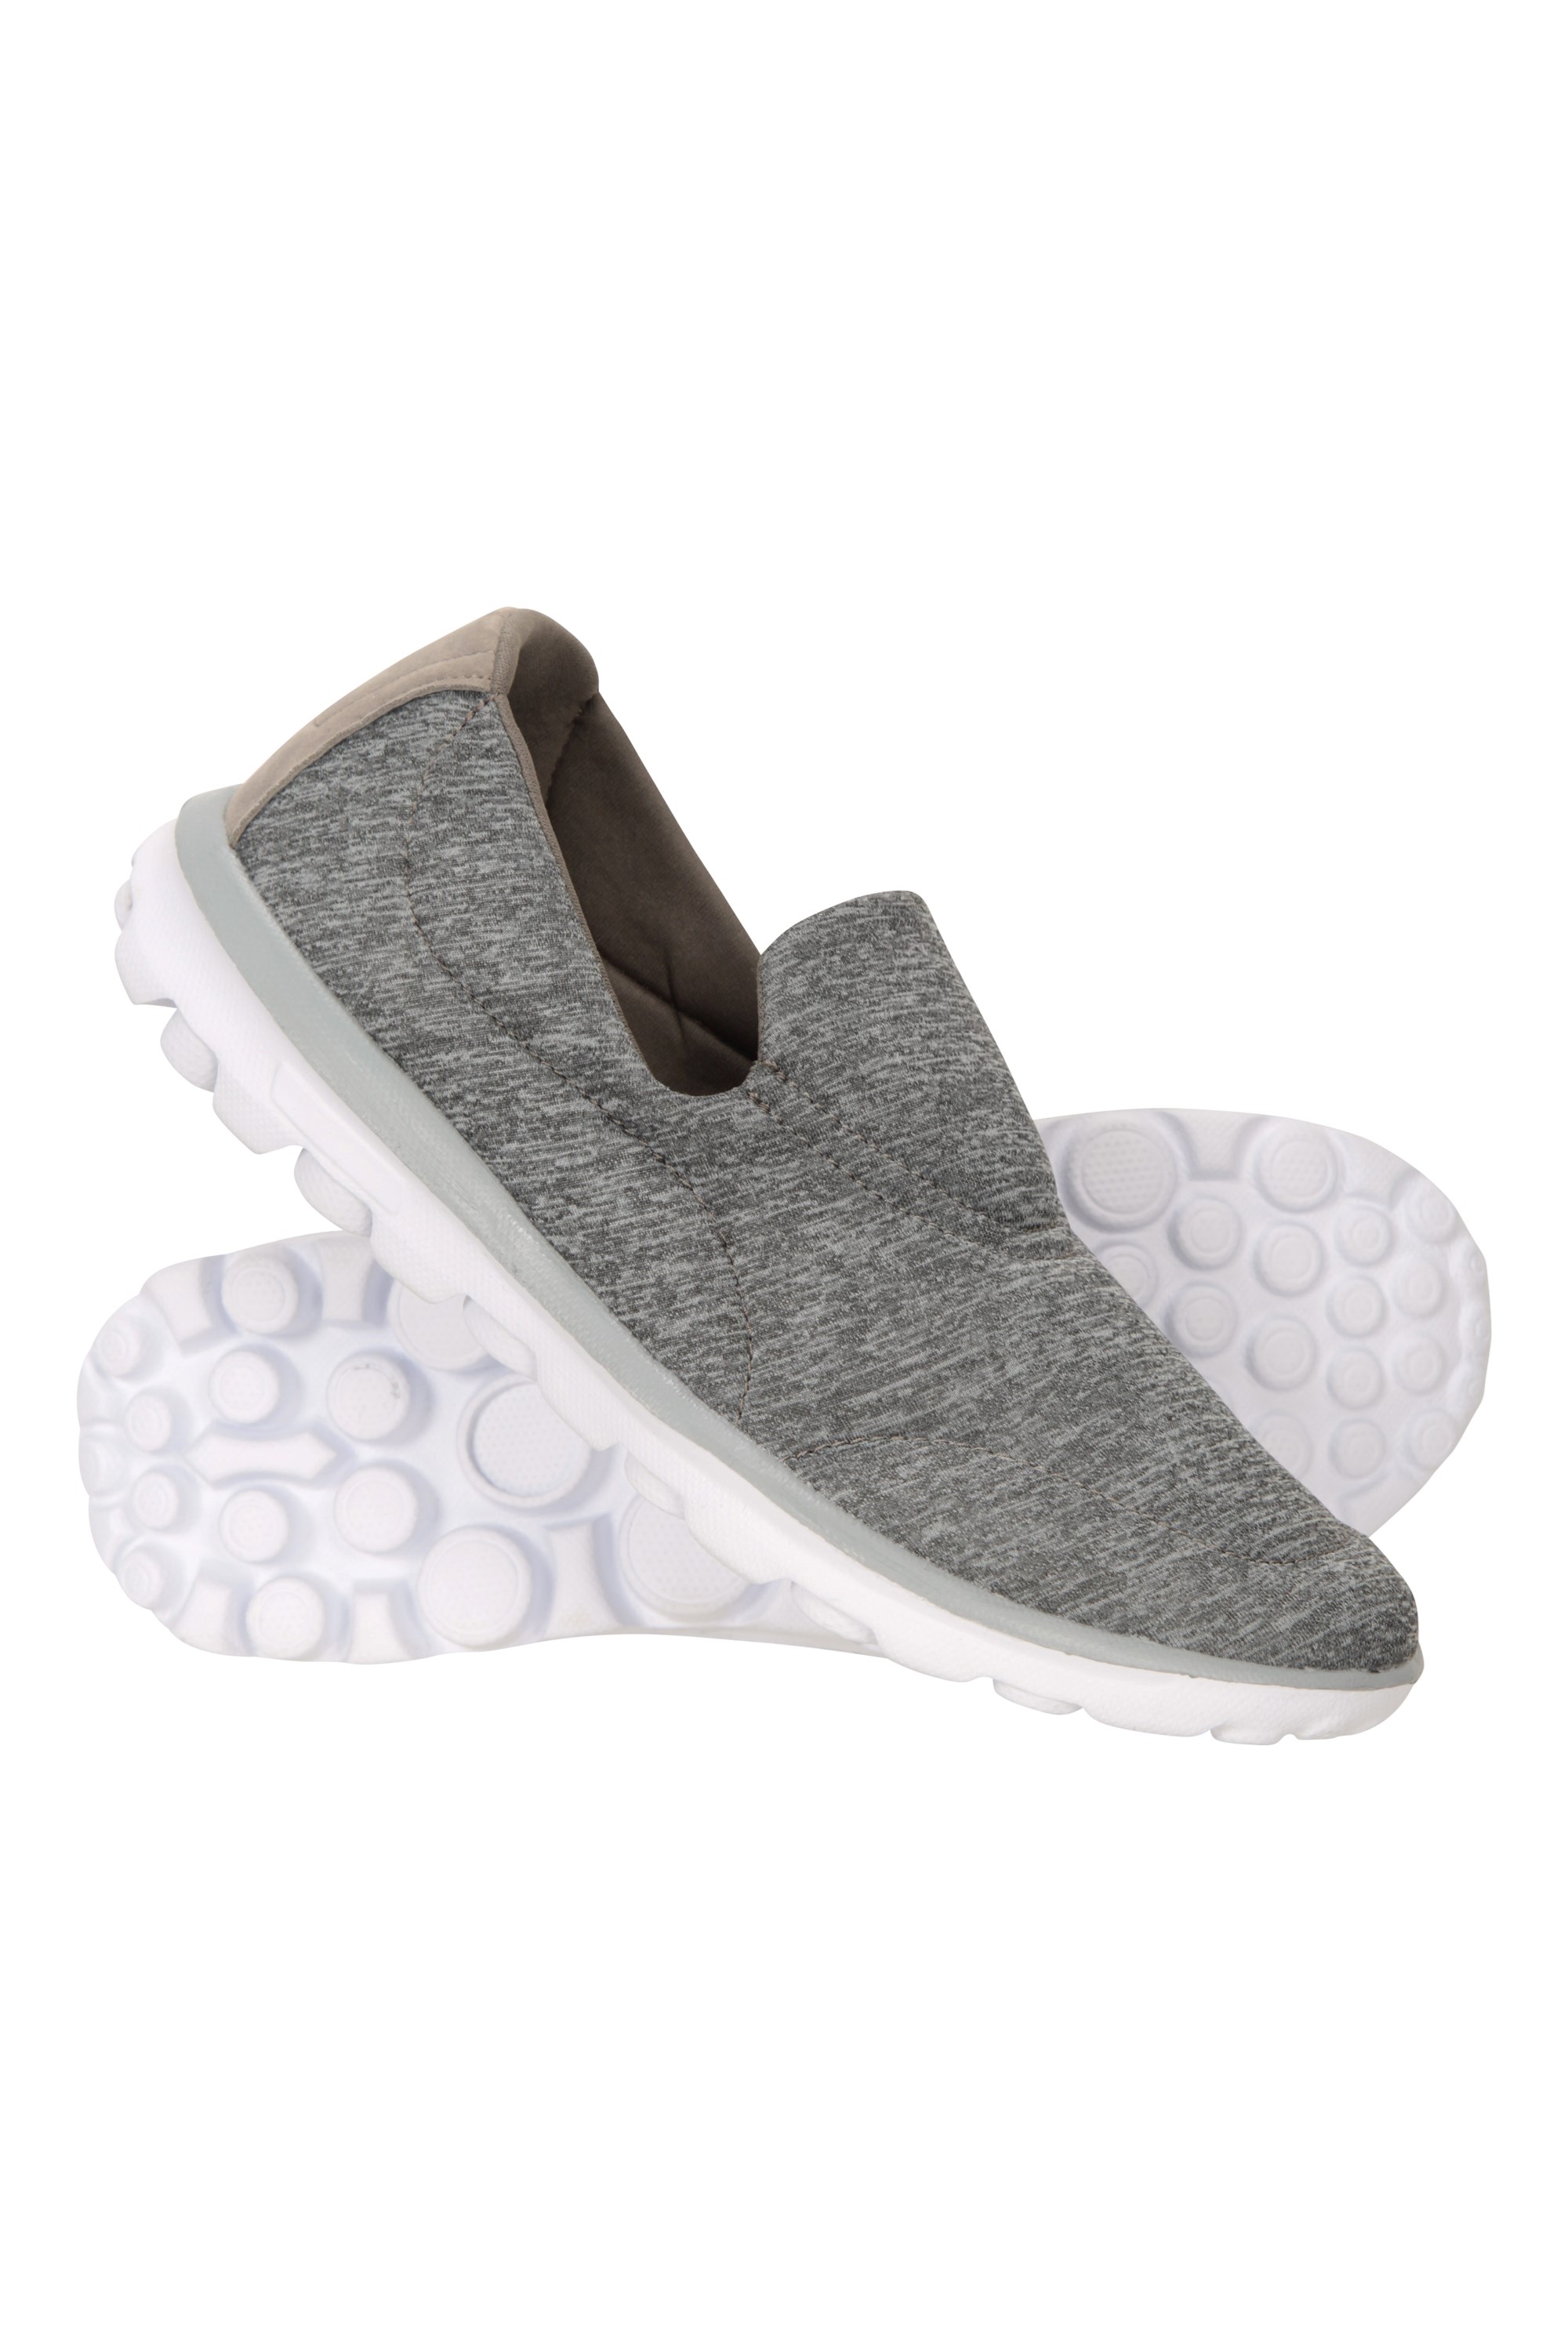 Lighthouse Womens Shoes - Grey